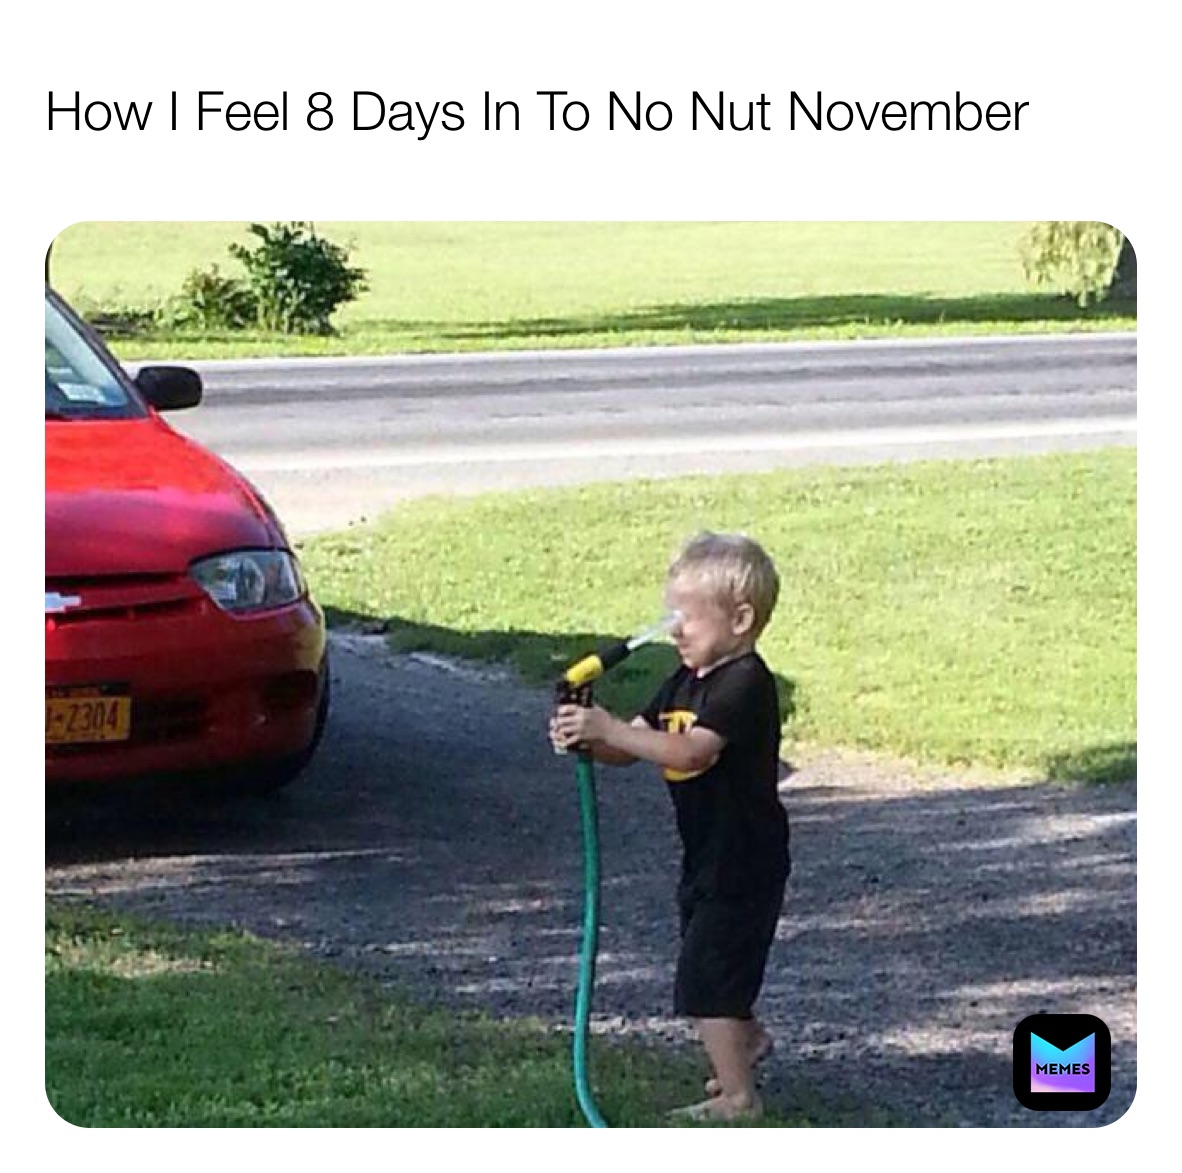 How I Feel 8 Days In To No Nut November